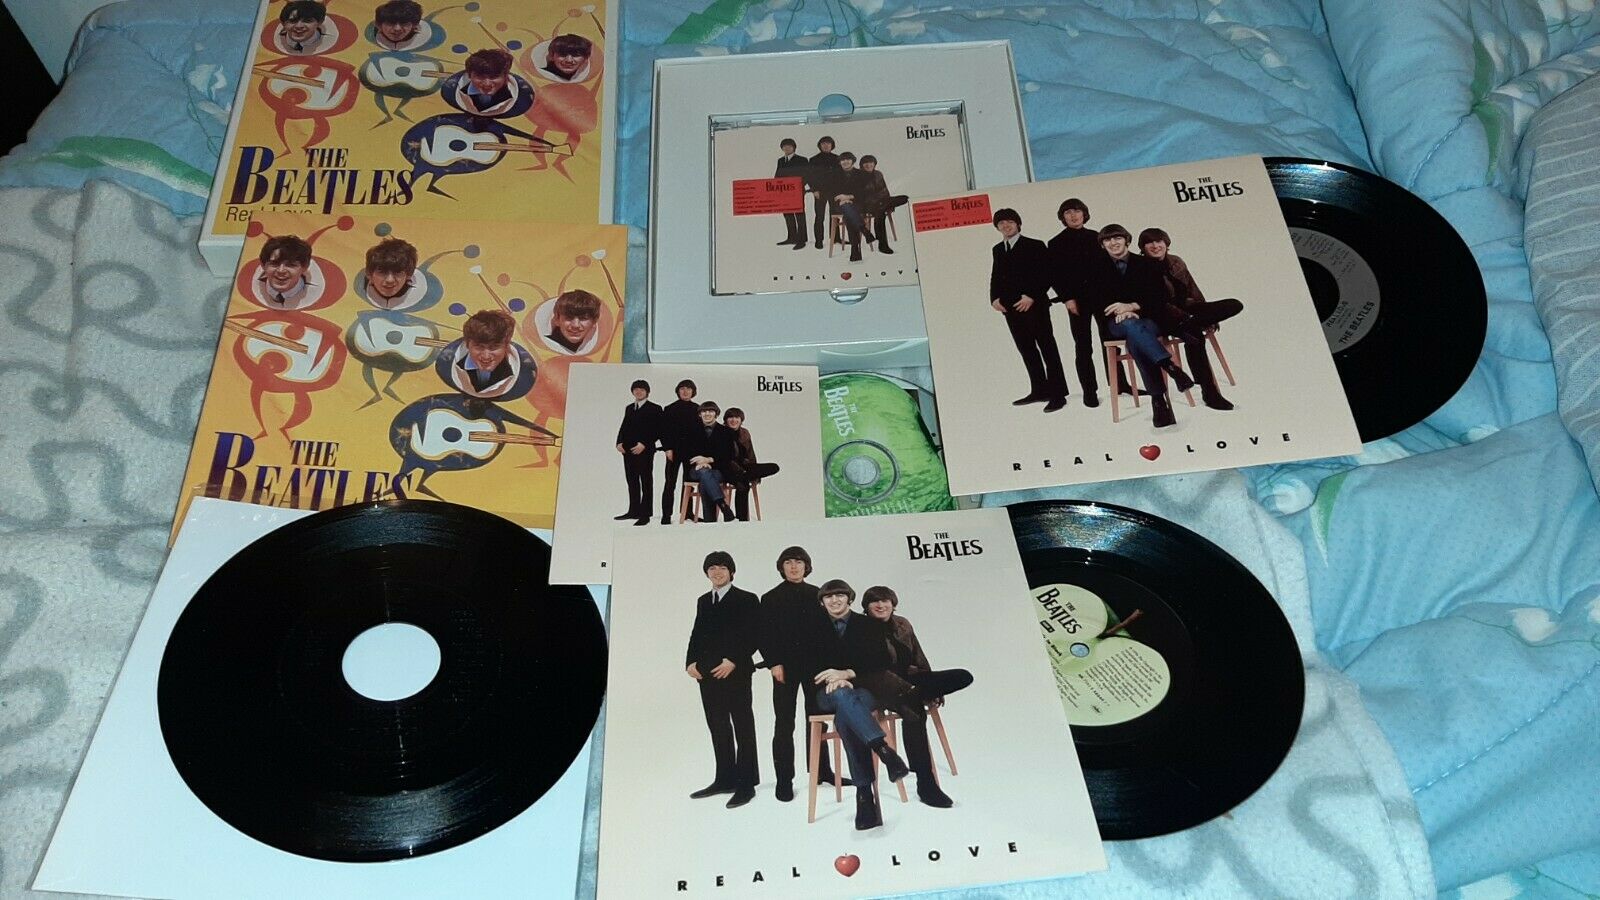 Pic 3 THE BEATLES I 3 BOX VINYL EXPERIENCE UFO MUSIC REAL LOVE LIVE AT BBC FREE AS A B